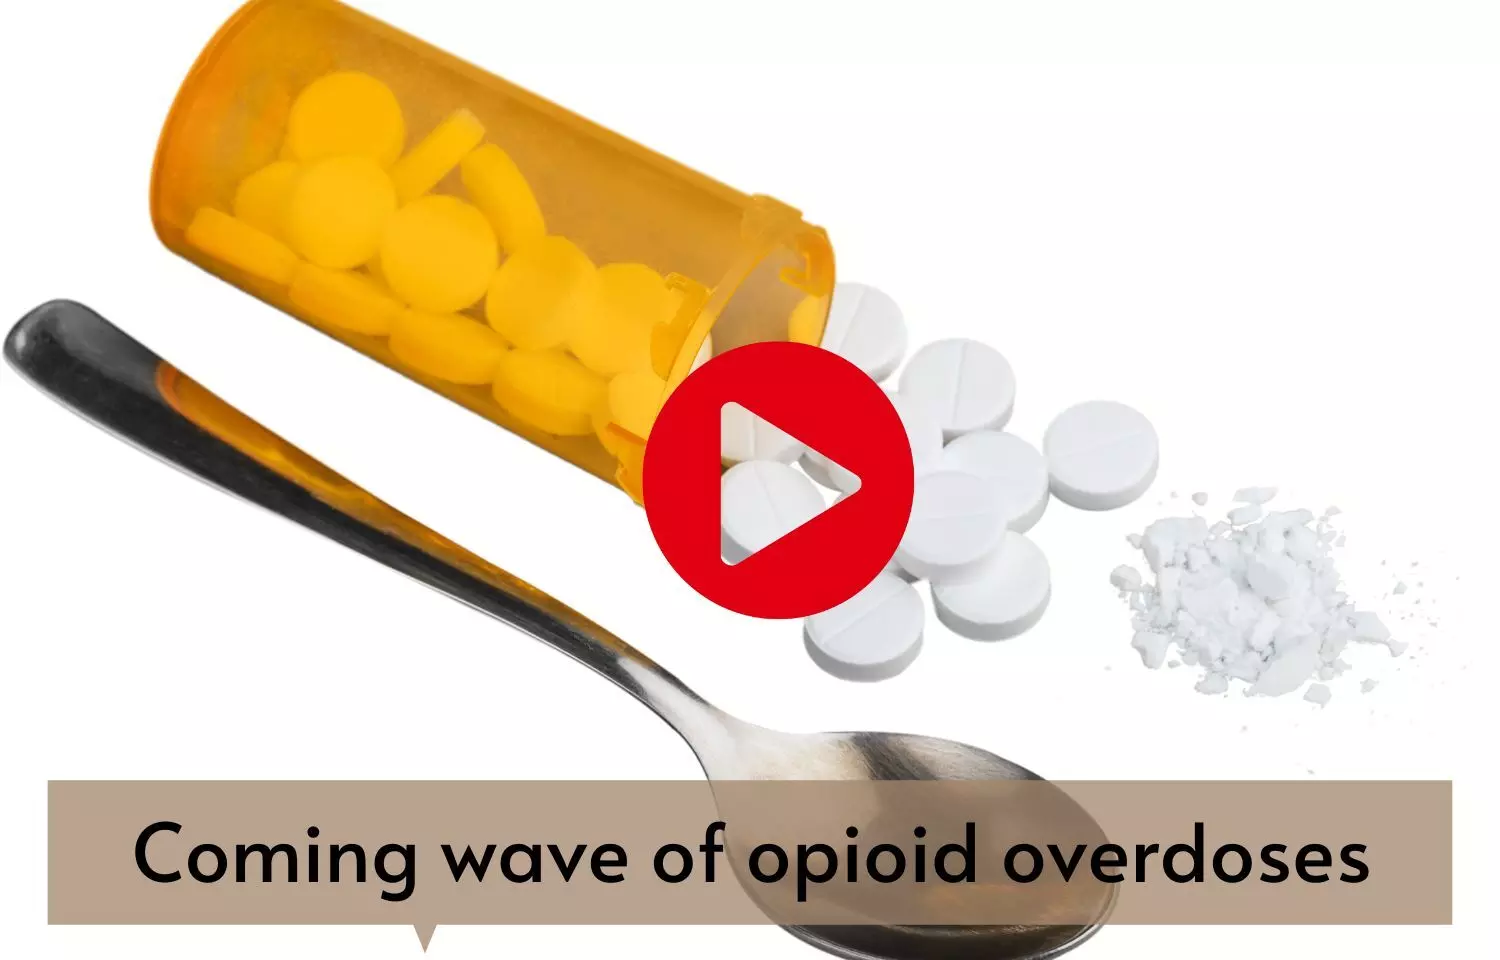 Coming wave of opioid overdoses